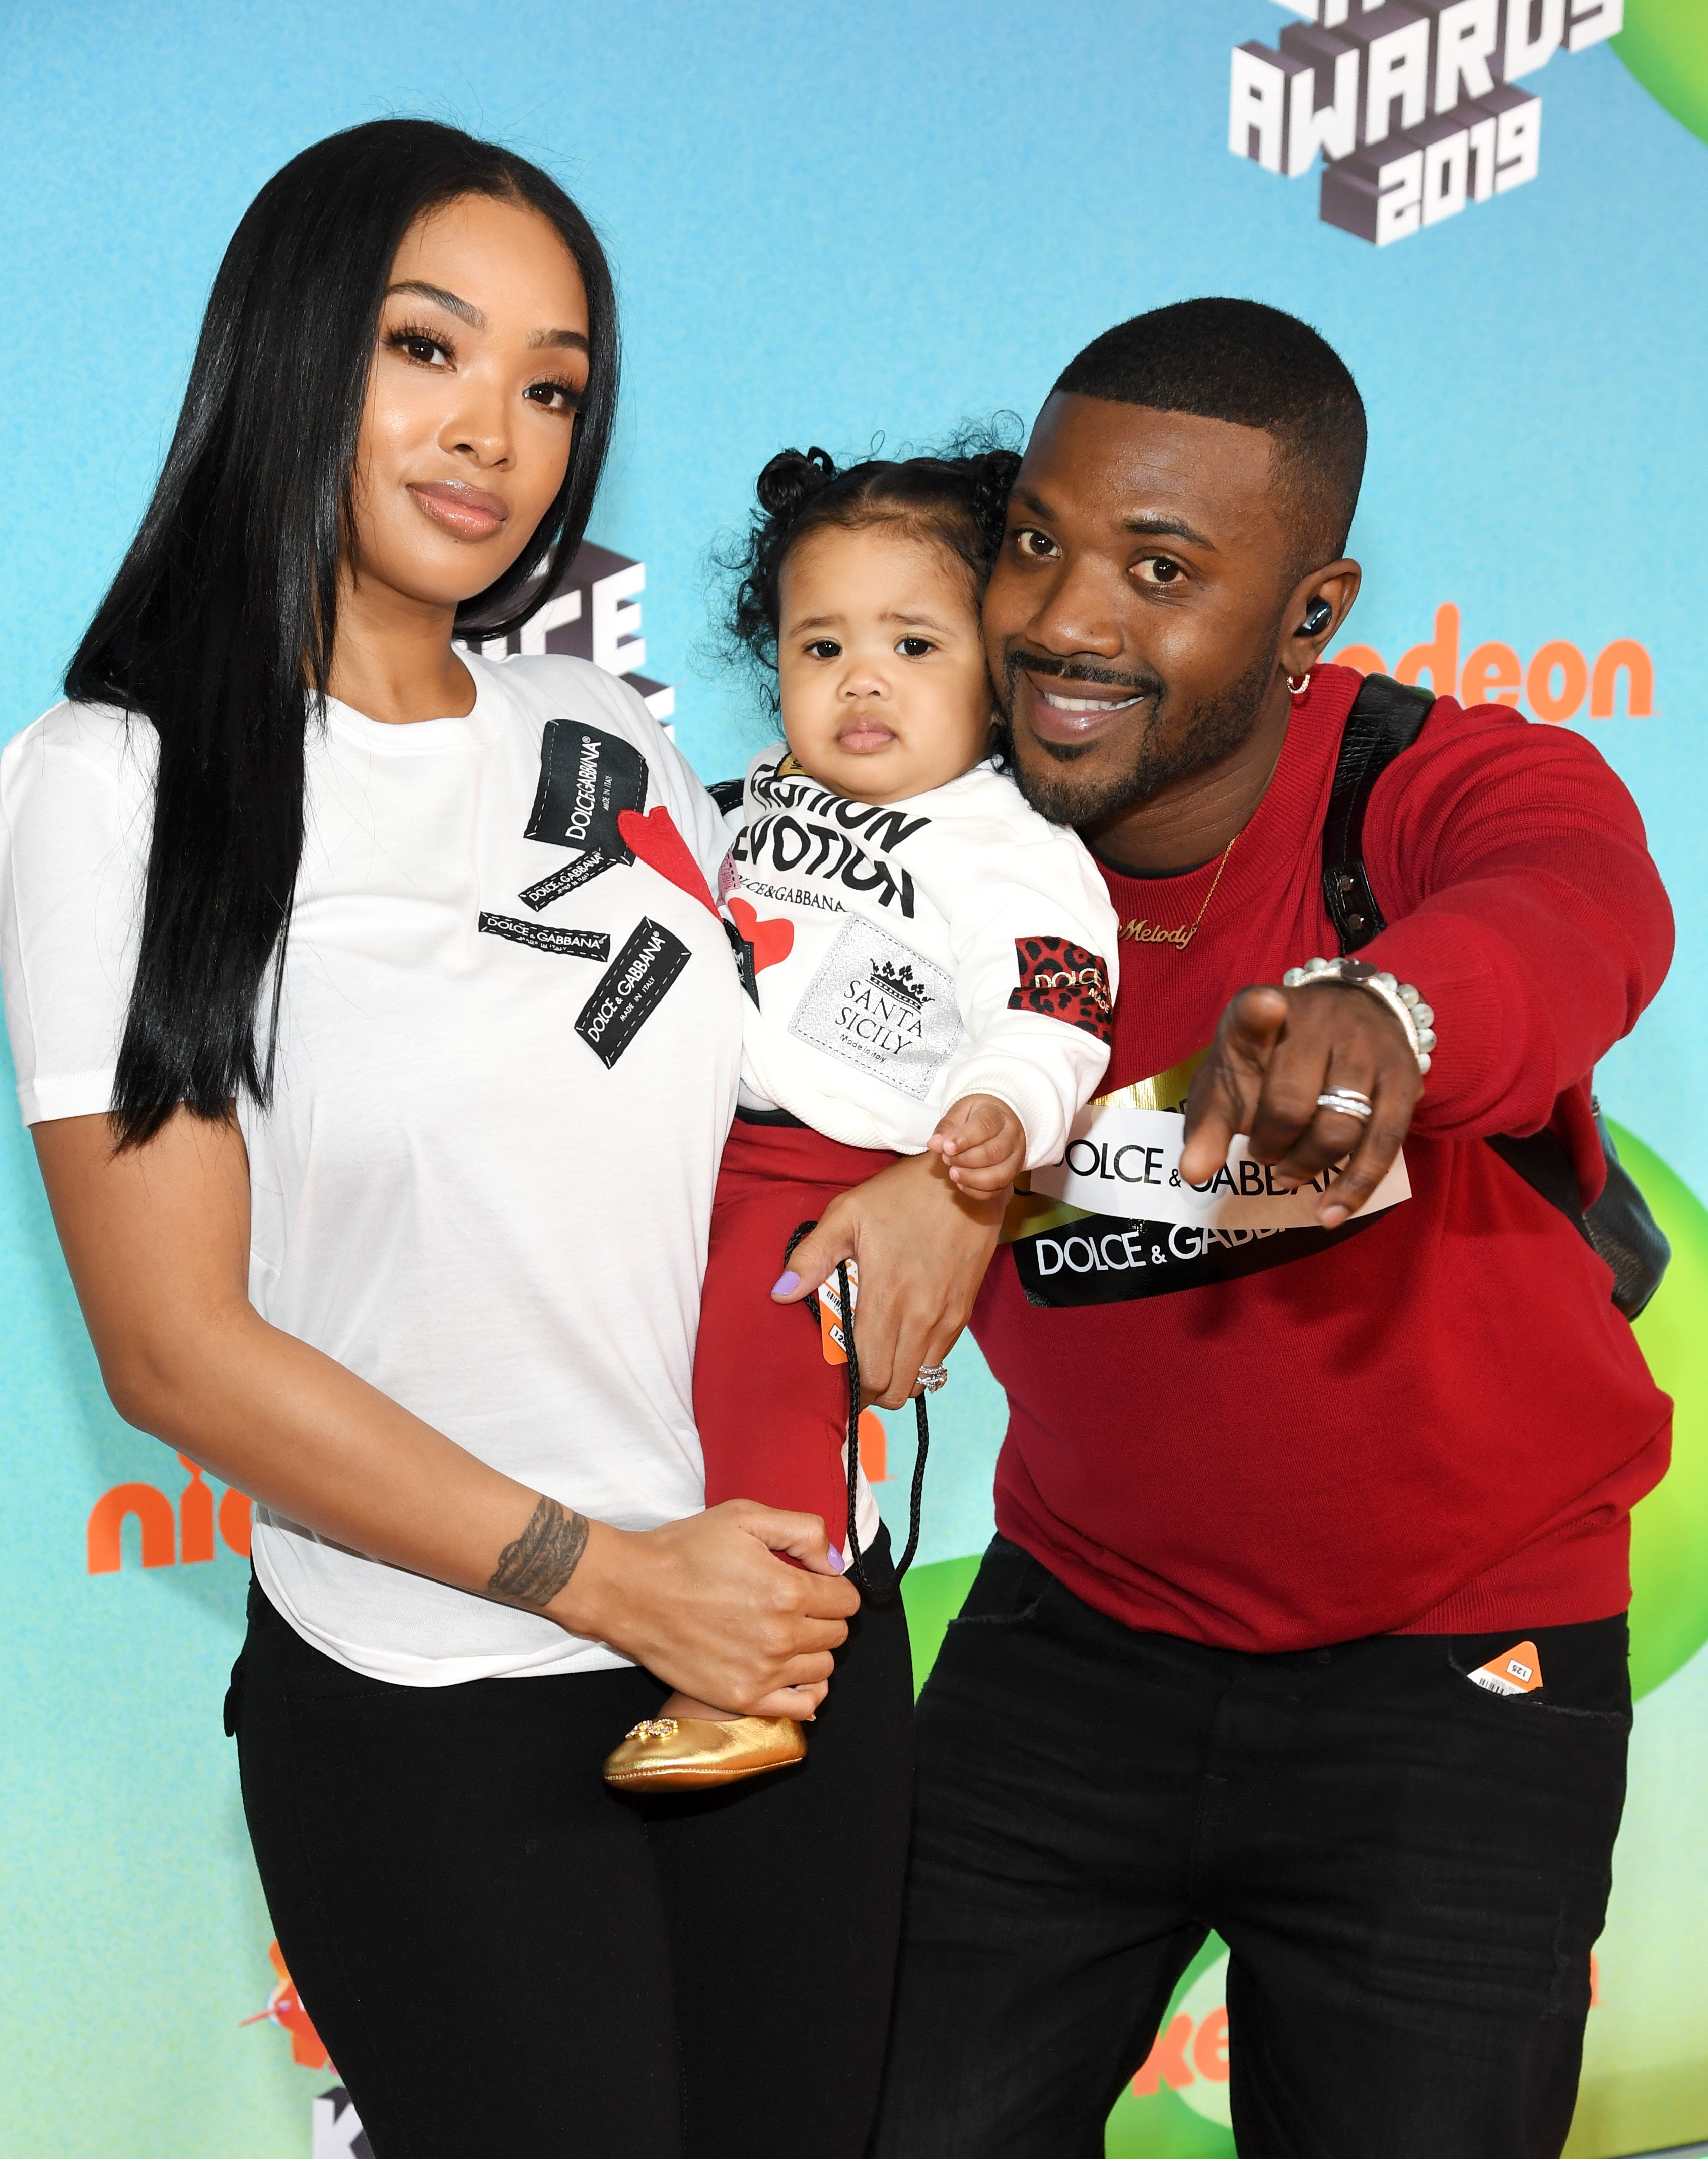 Princess Love, Ray J, and their daughter Melody at the red carpet of Nickelodeon's Kid's Choice Awards in March 2019. | Photo: Getty Images